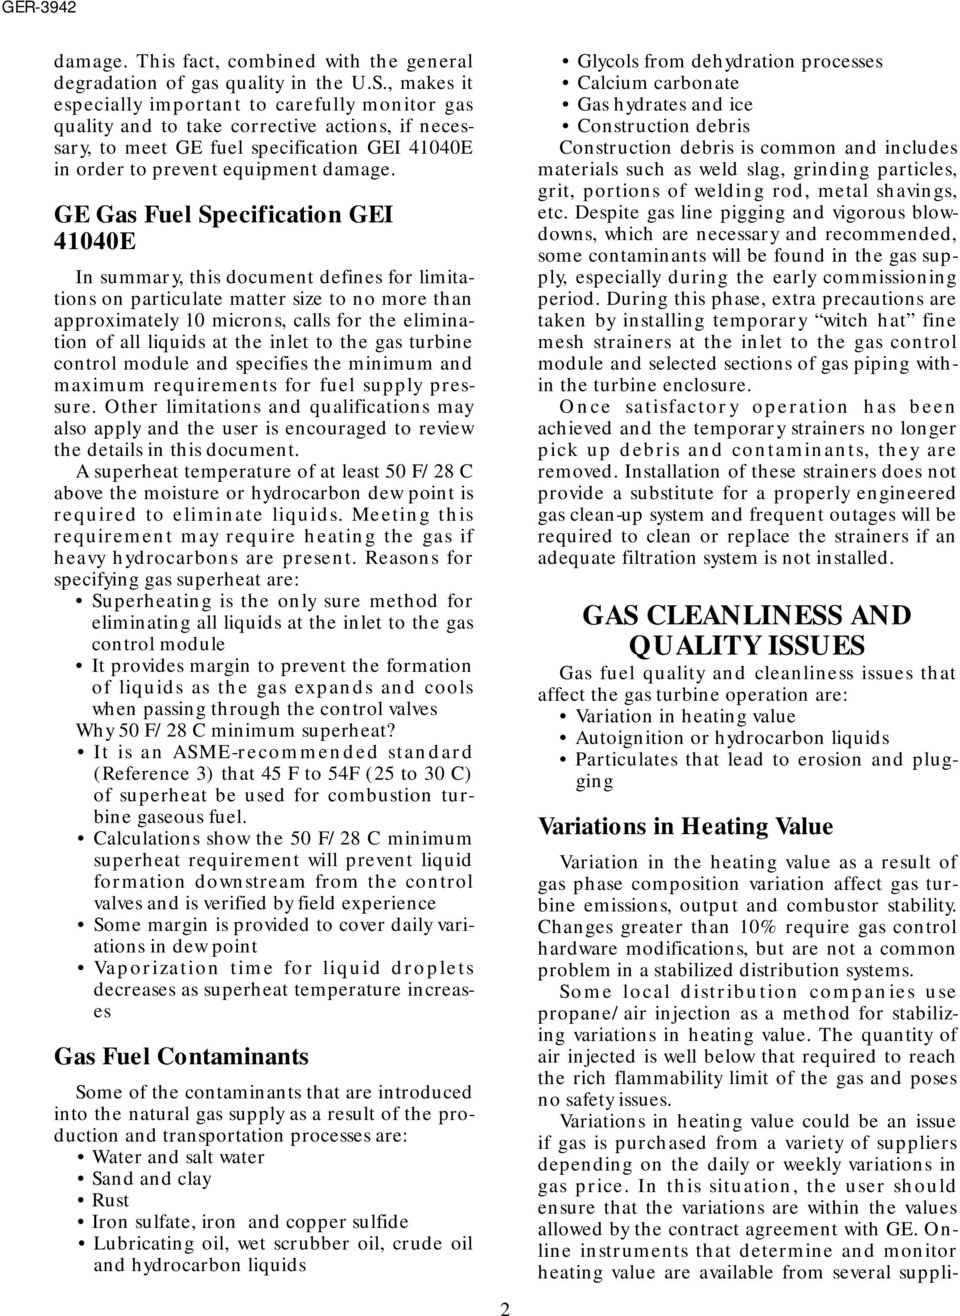 GE Gas Fuel Specification GEI 41040E In summary, this document defines for limitations on particulate matter size to no more than approximately 10 microns, calls for the elimination of all liquids at